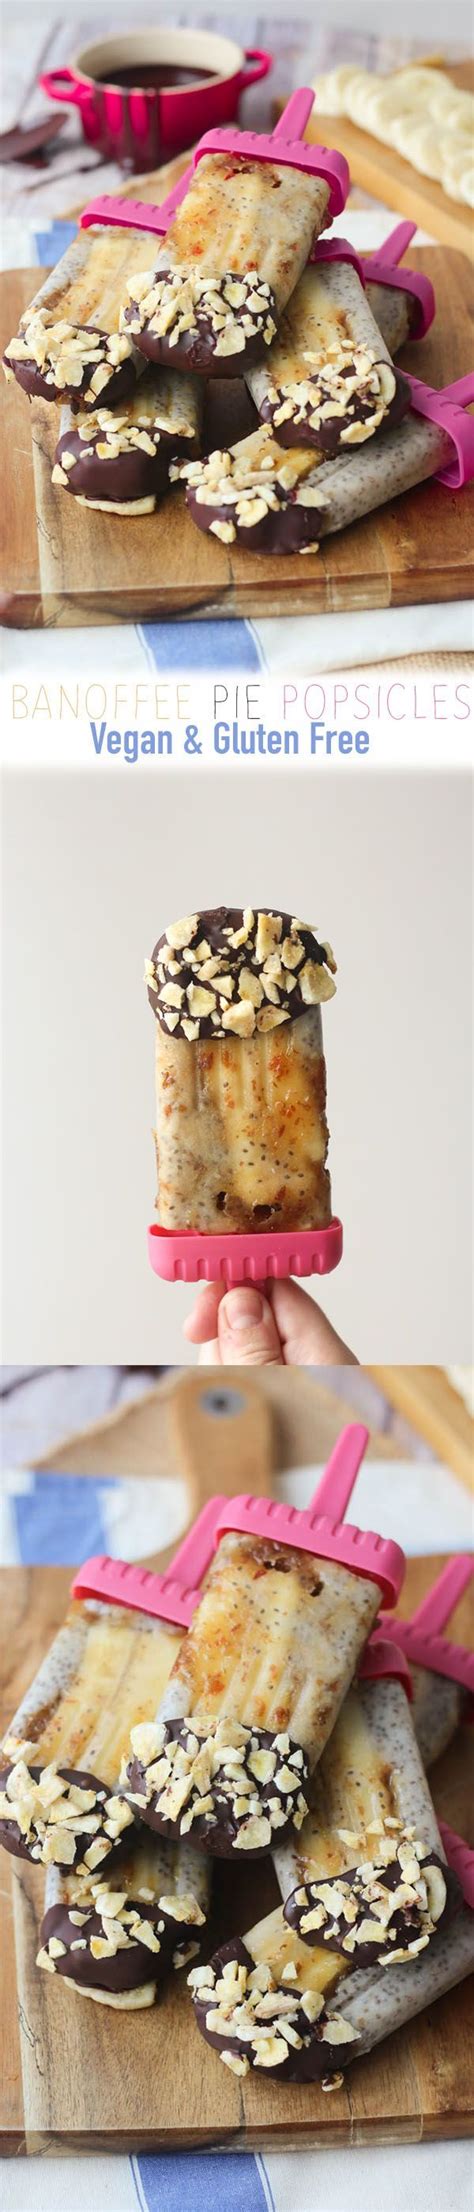 These Vegan Banoffee Pie Popsicles Are The Perfect Gluten Free Summer